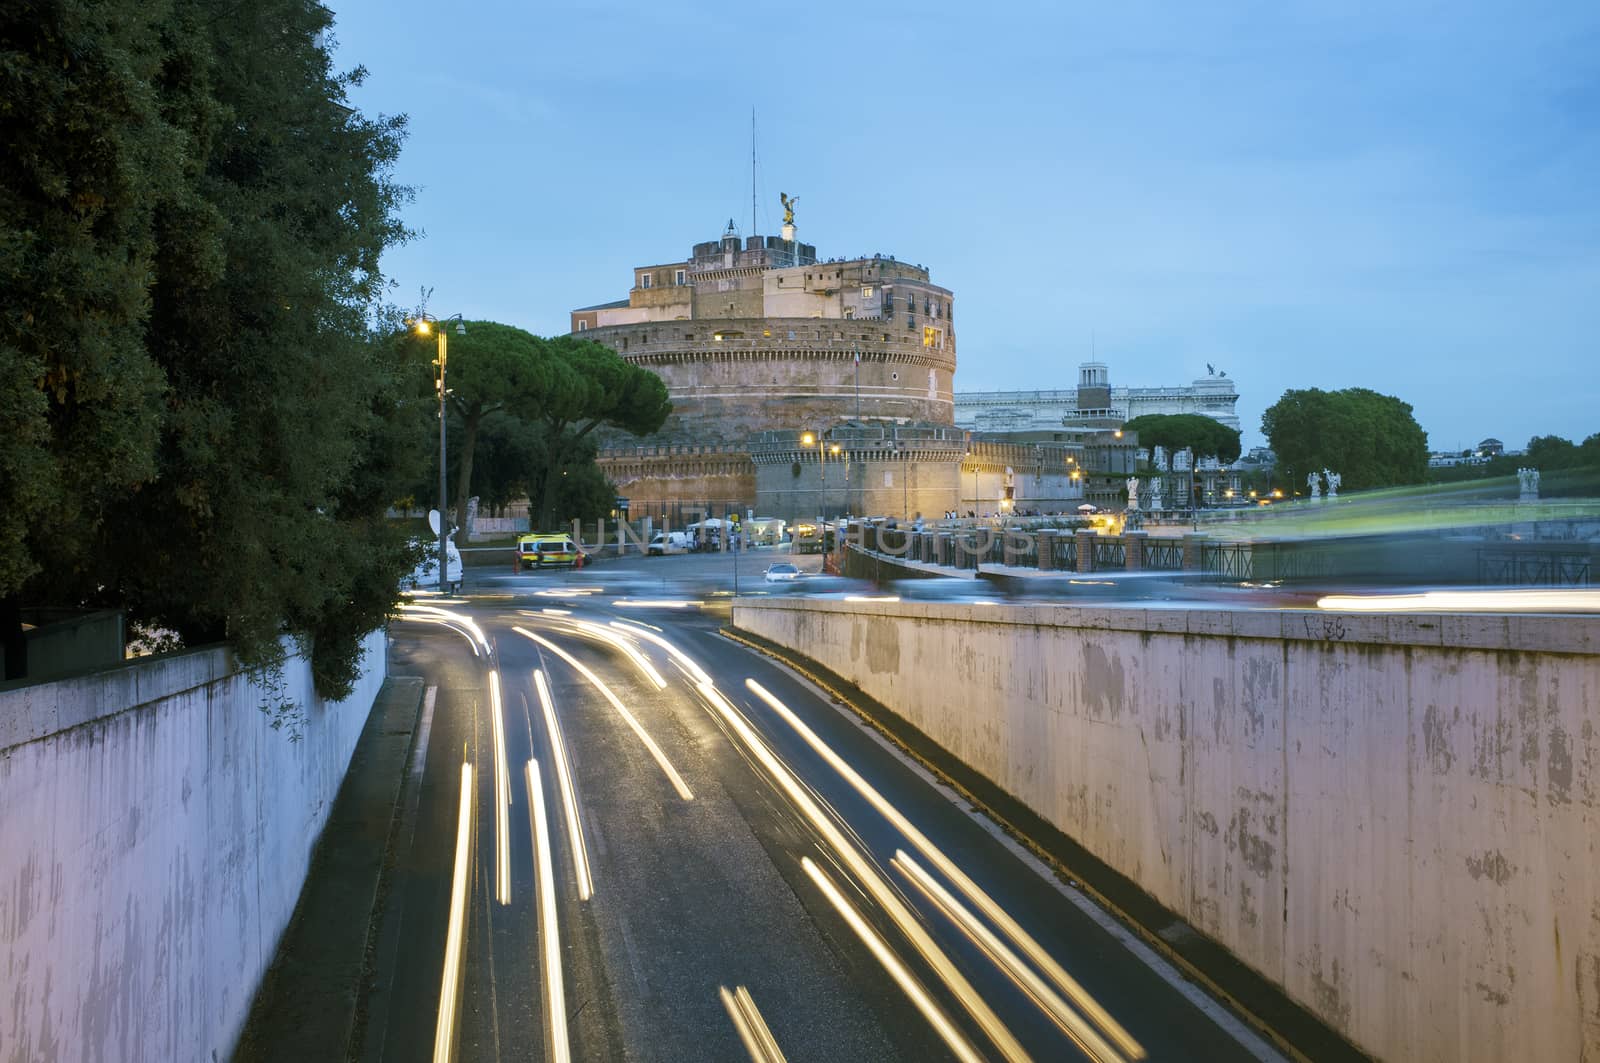 The Mausoleum of Hadrian, usually known as Castel Sant'Angelo in evening light. Light streaks from moving vehicles. Rome, Italy